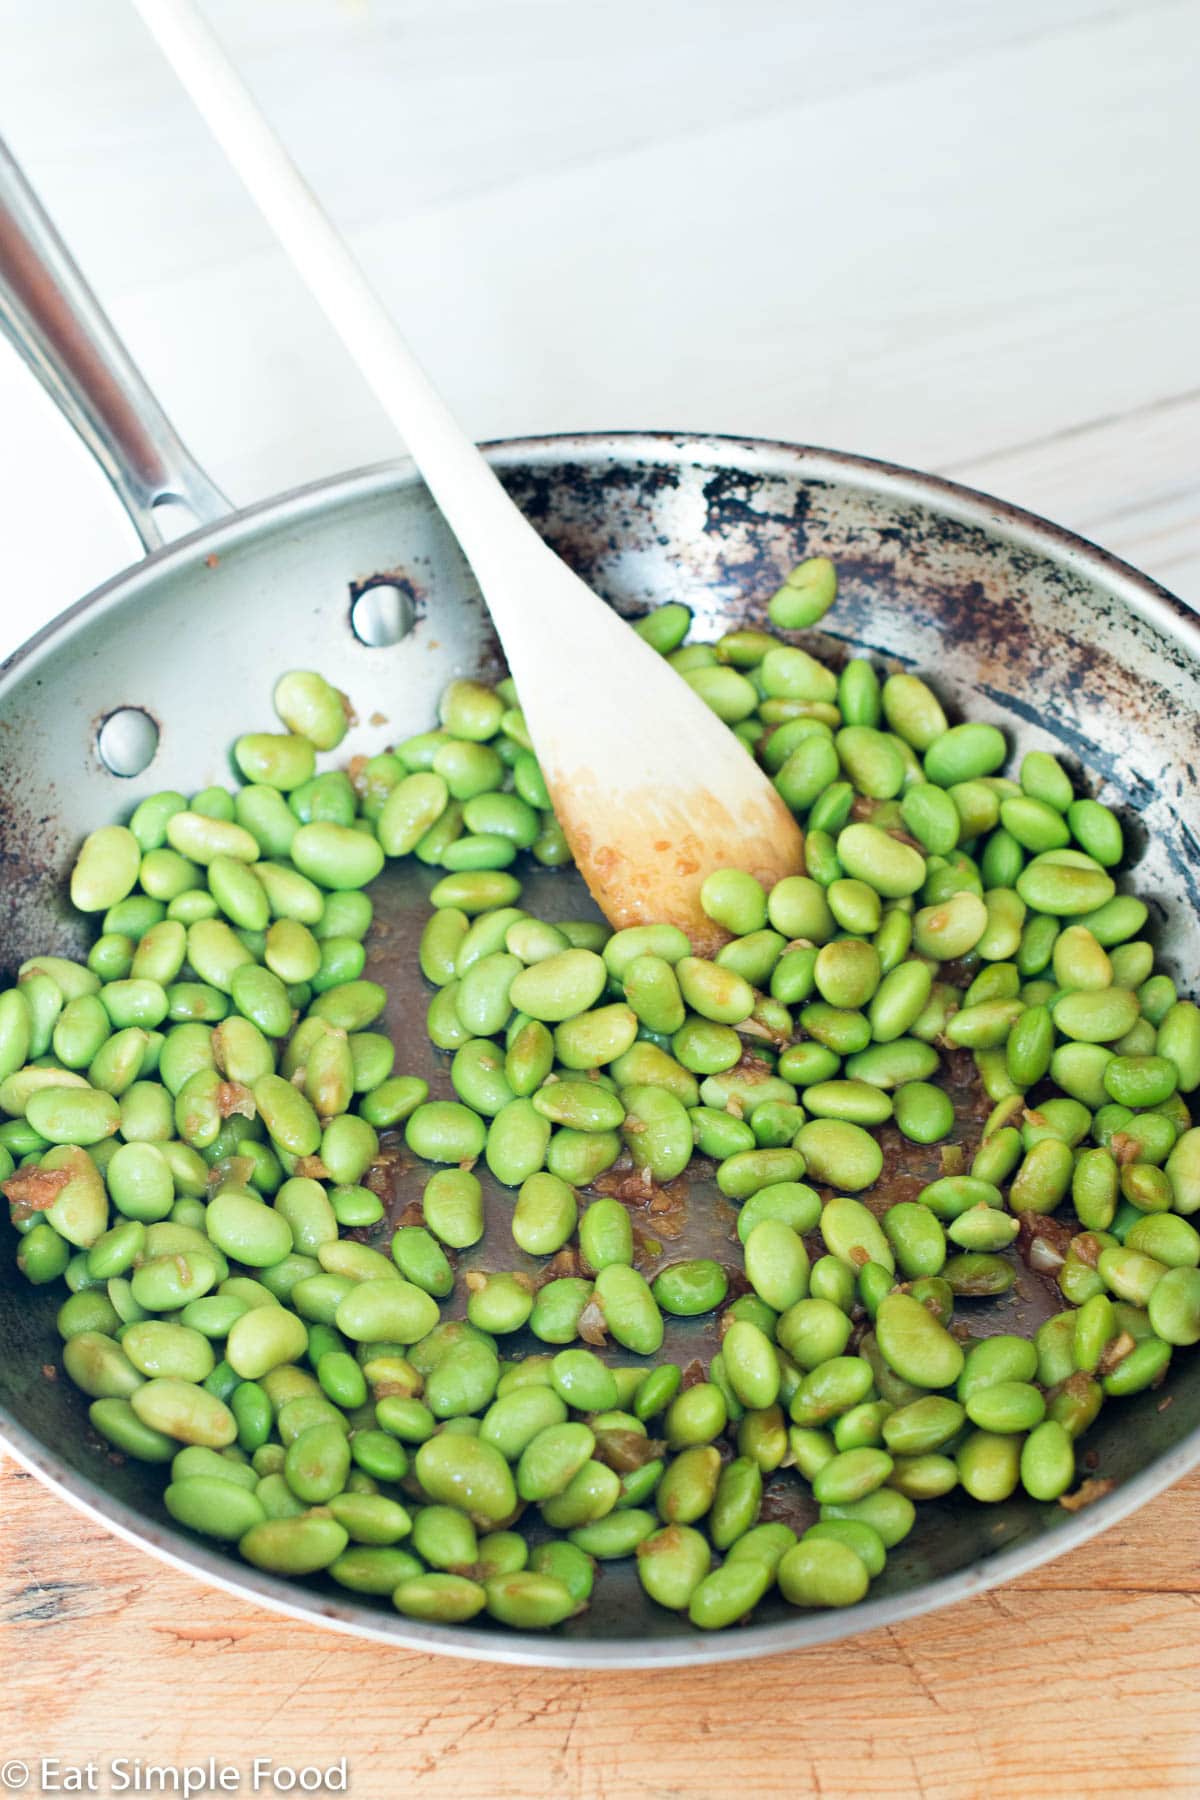 Stainless steel pan of shelled edamame cooked with garlic, ginger, and soy sauce. Wooden spoon hanging out the side.